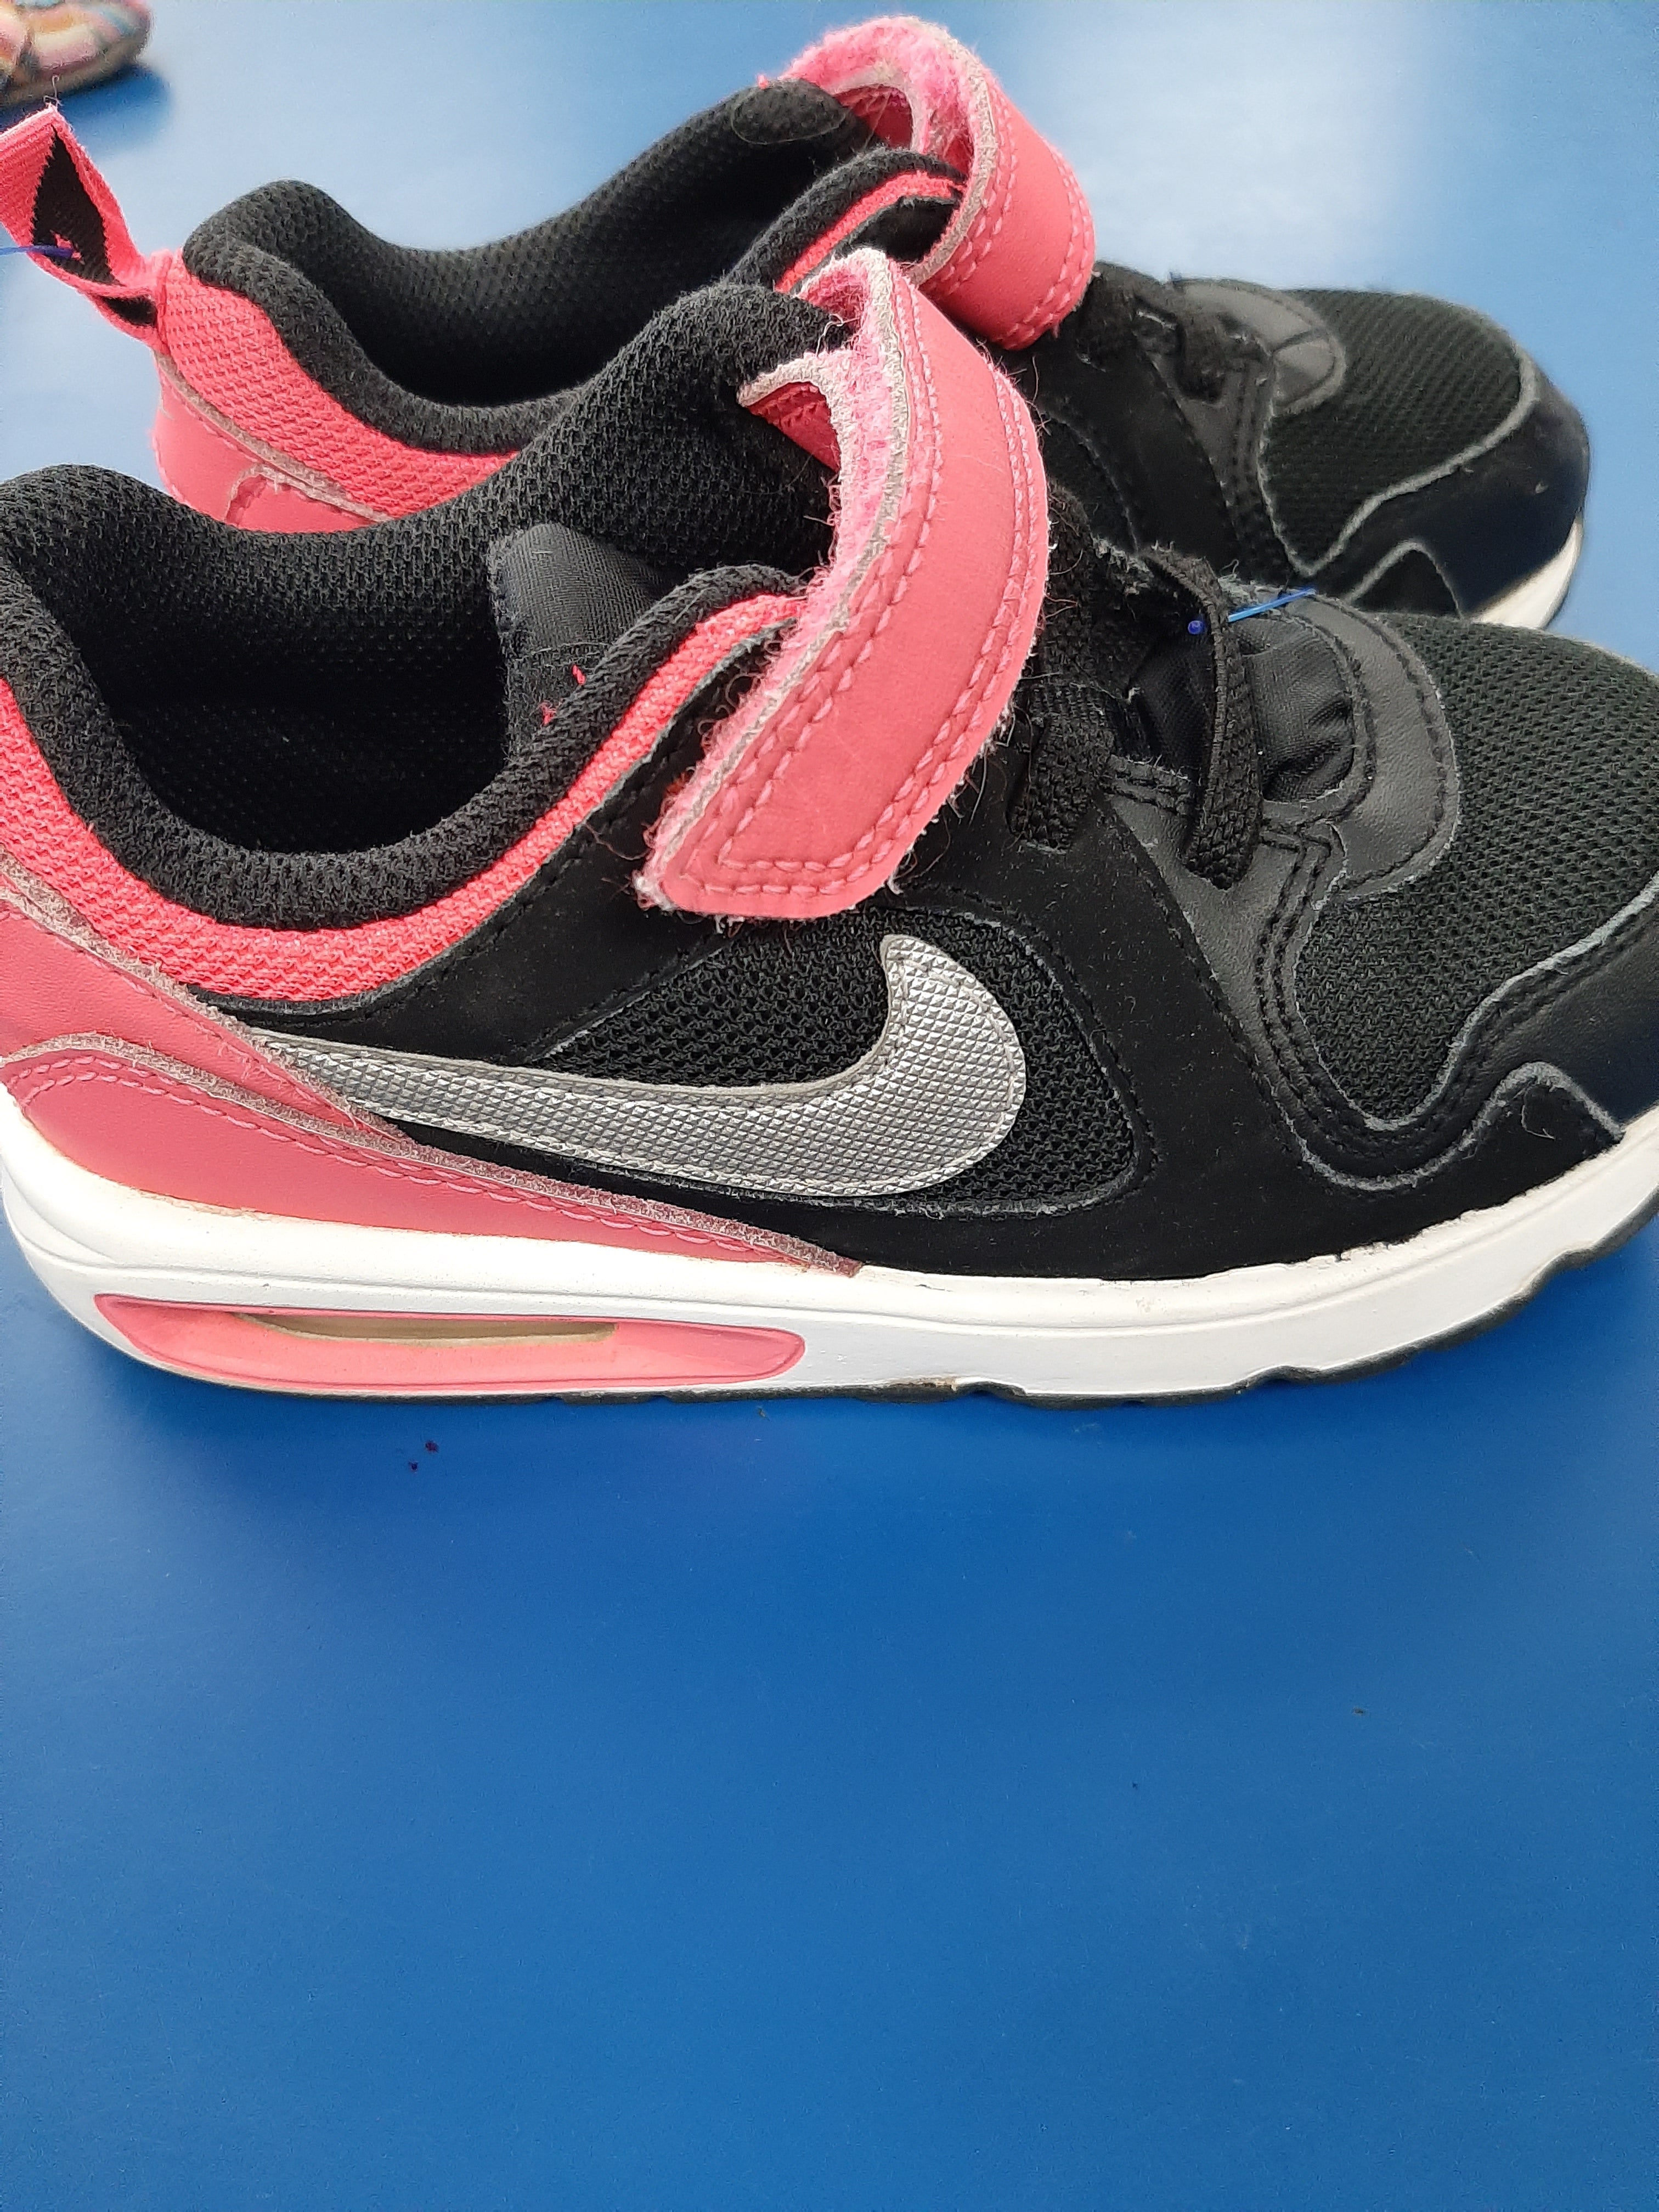 NIKE Pink and Black Sneakers sz 10